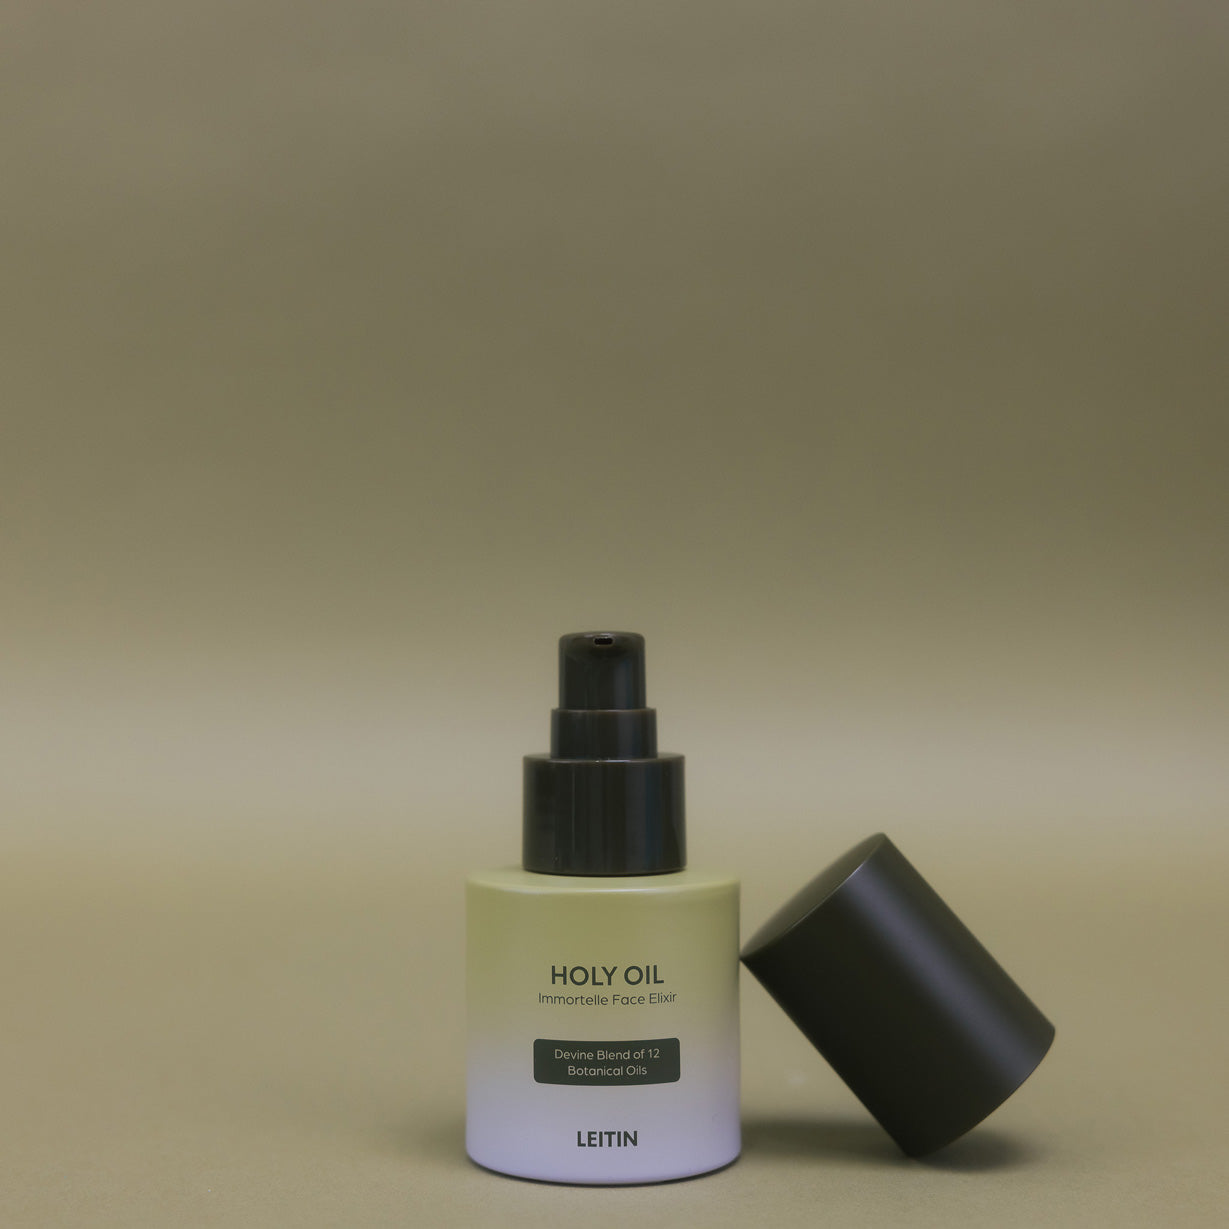 Image of LEITIN Skincare's Holy Face Oil with Lid off